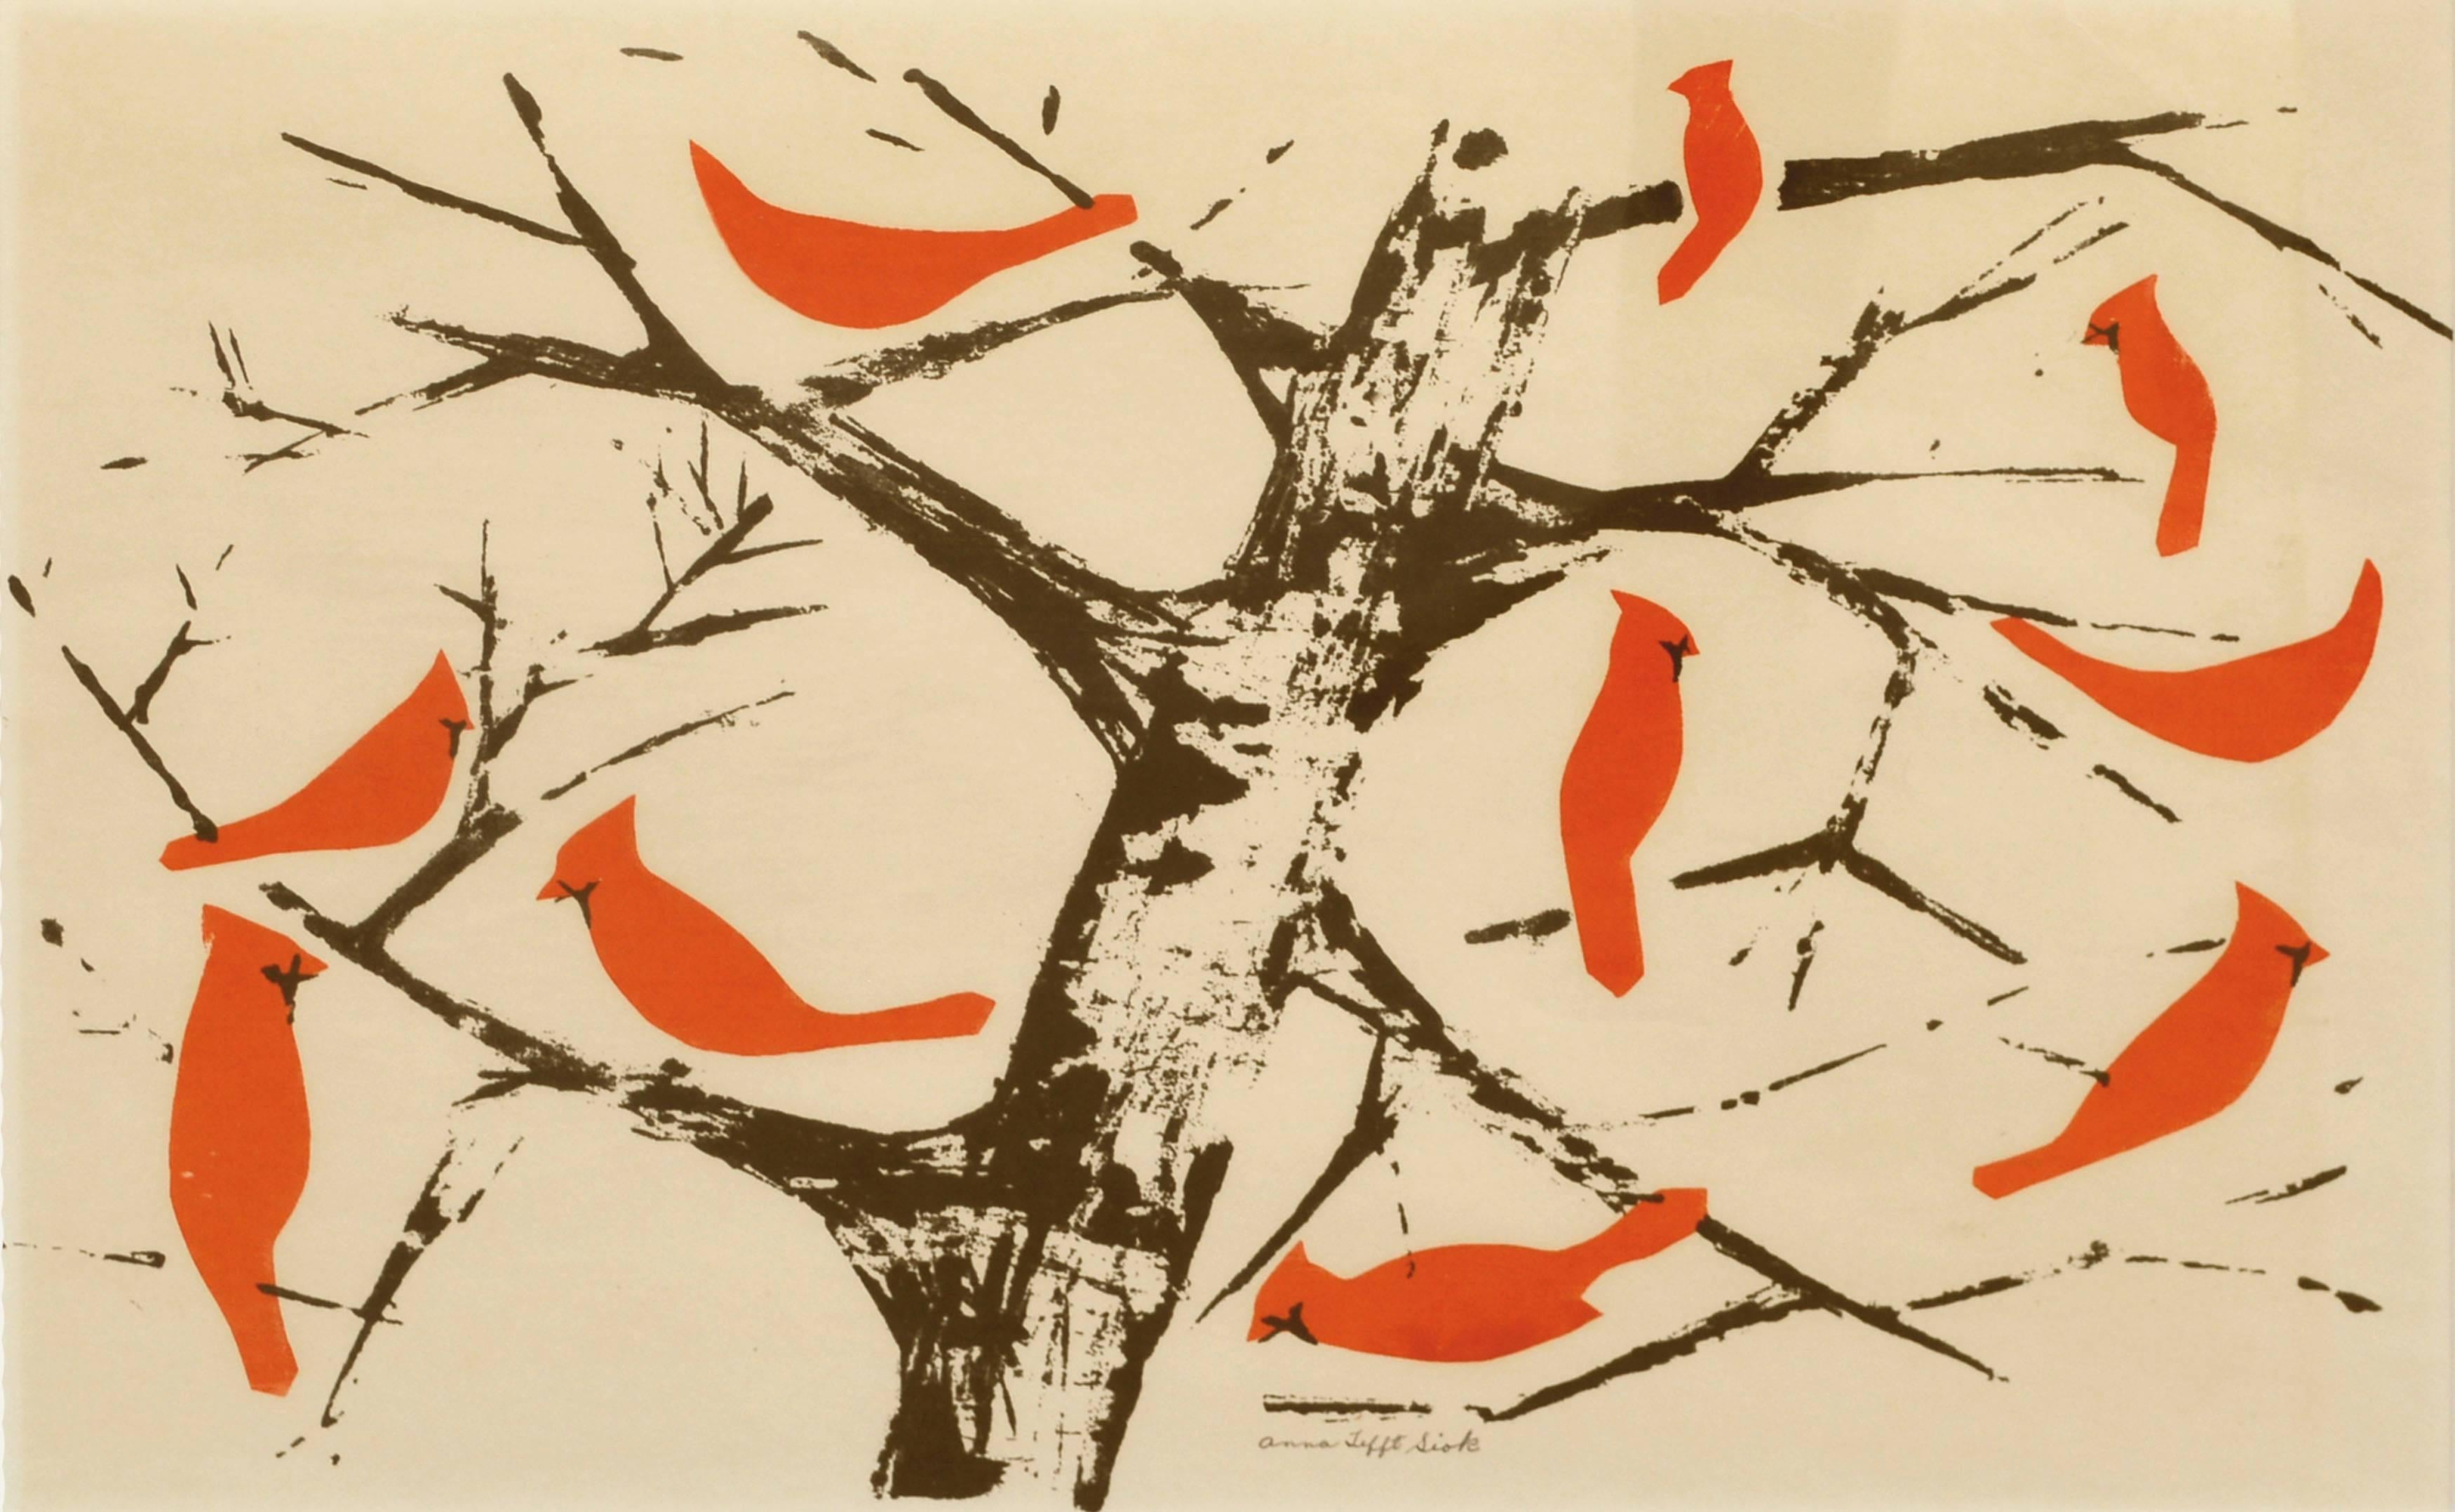 Modernist Red Cardinals - Painting by Anna Tefft Siok